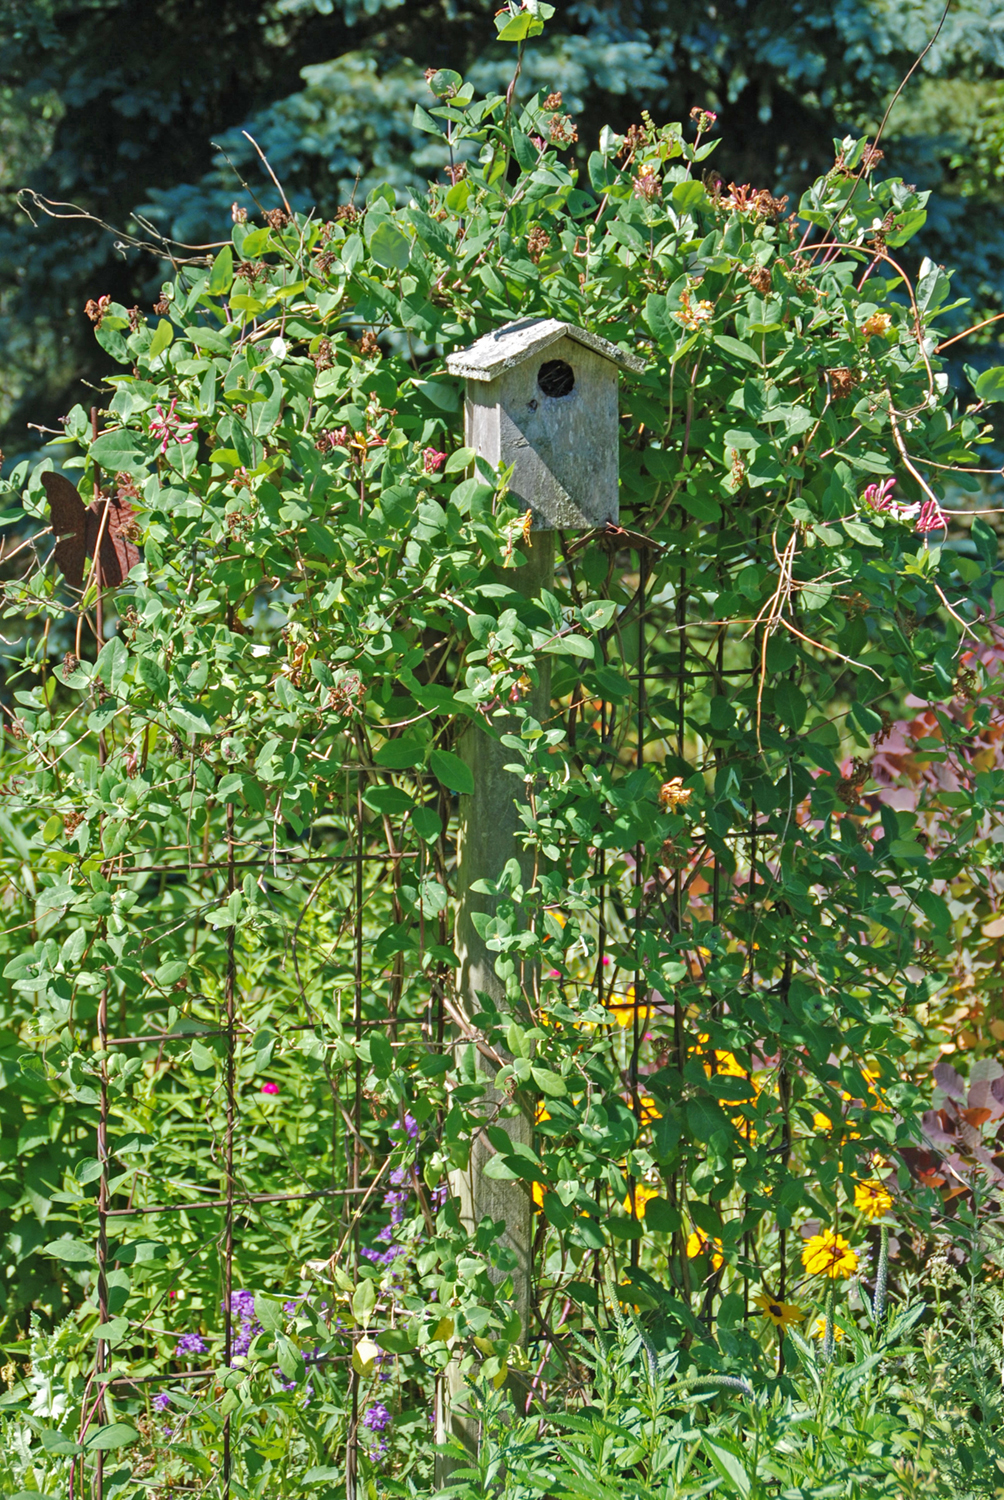 Bring in the birds with birdhouses and benefit from their diet of insects, including many garden pests and mosquitoes.